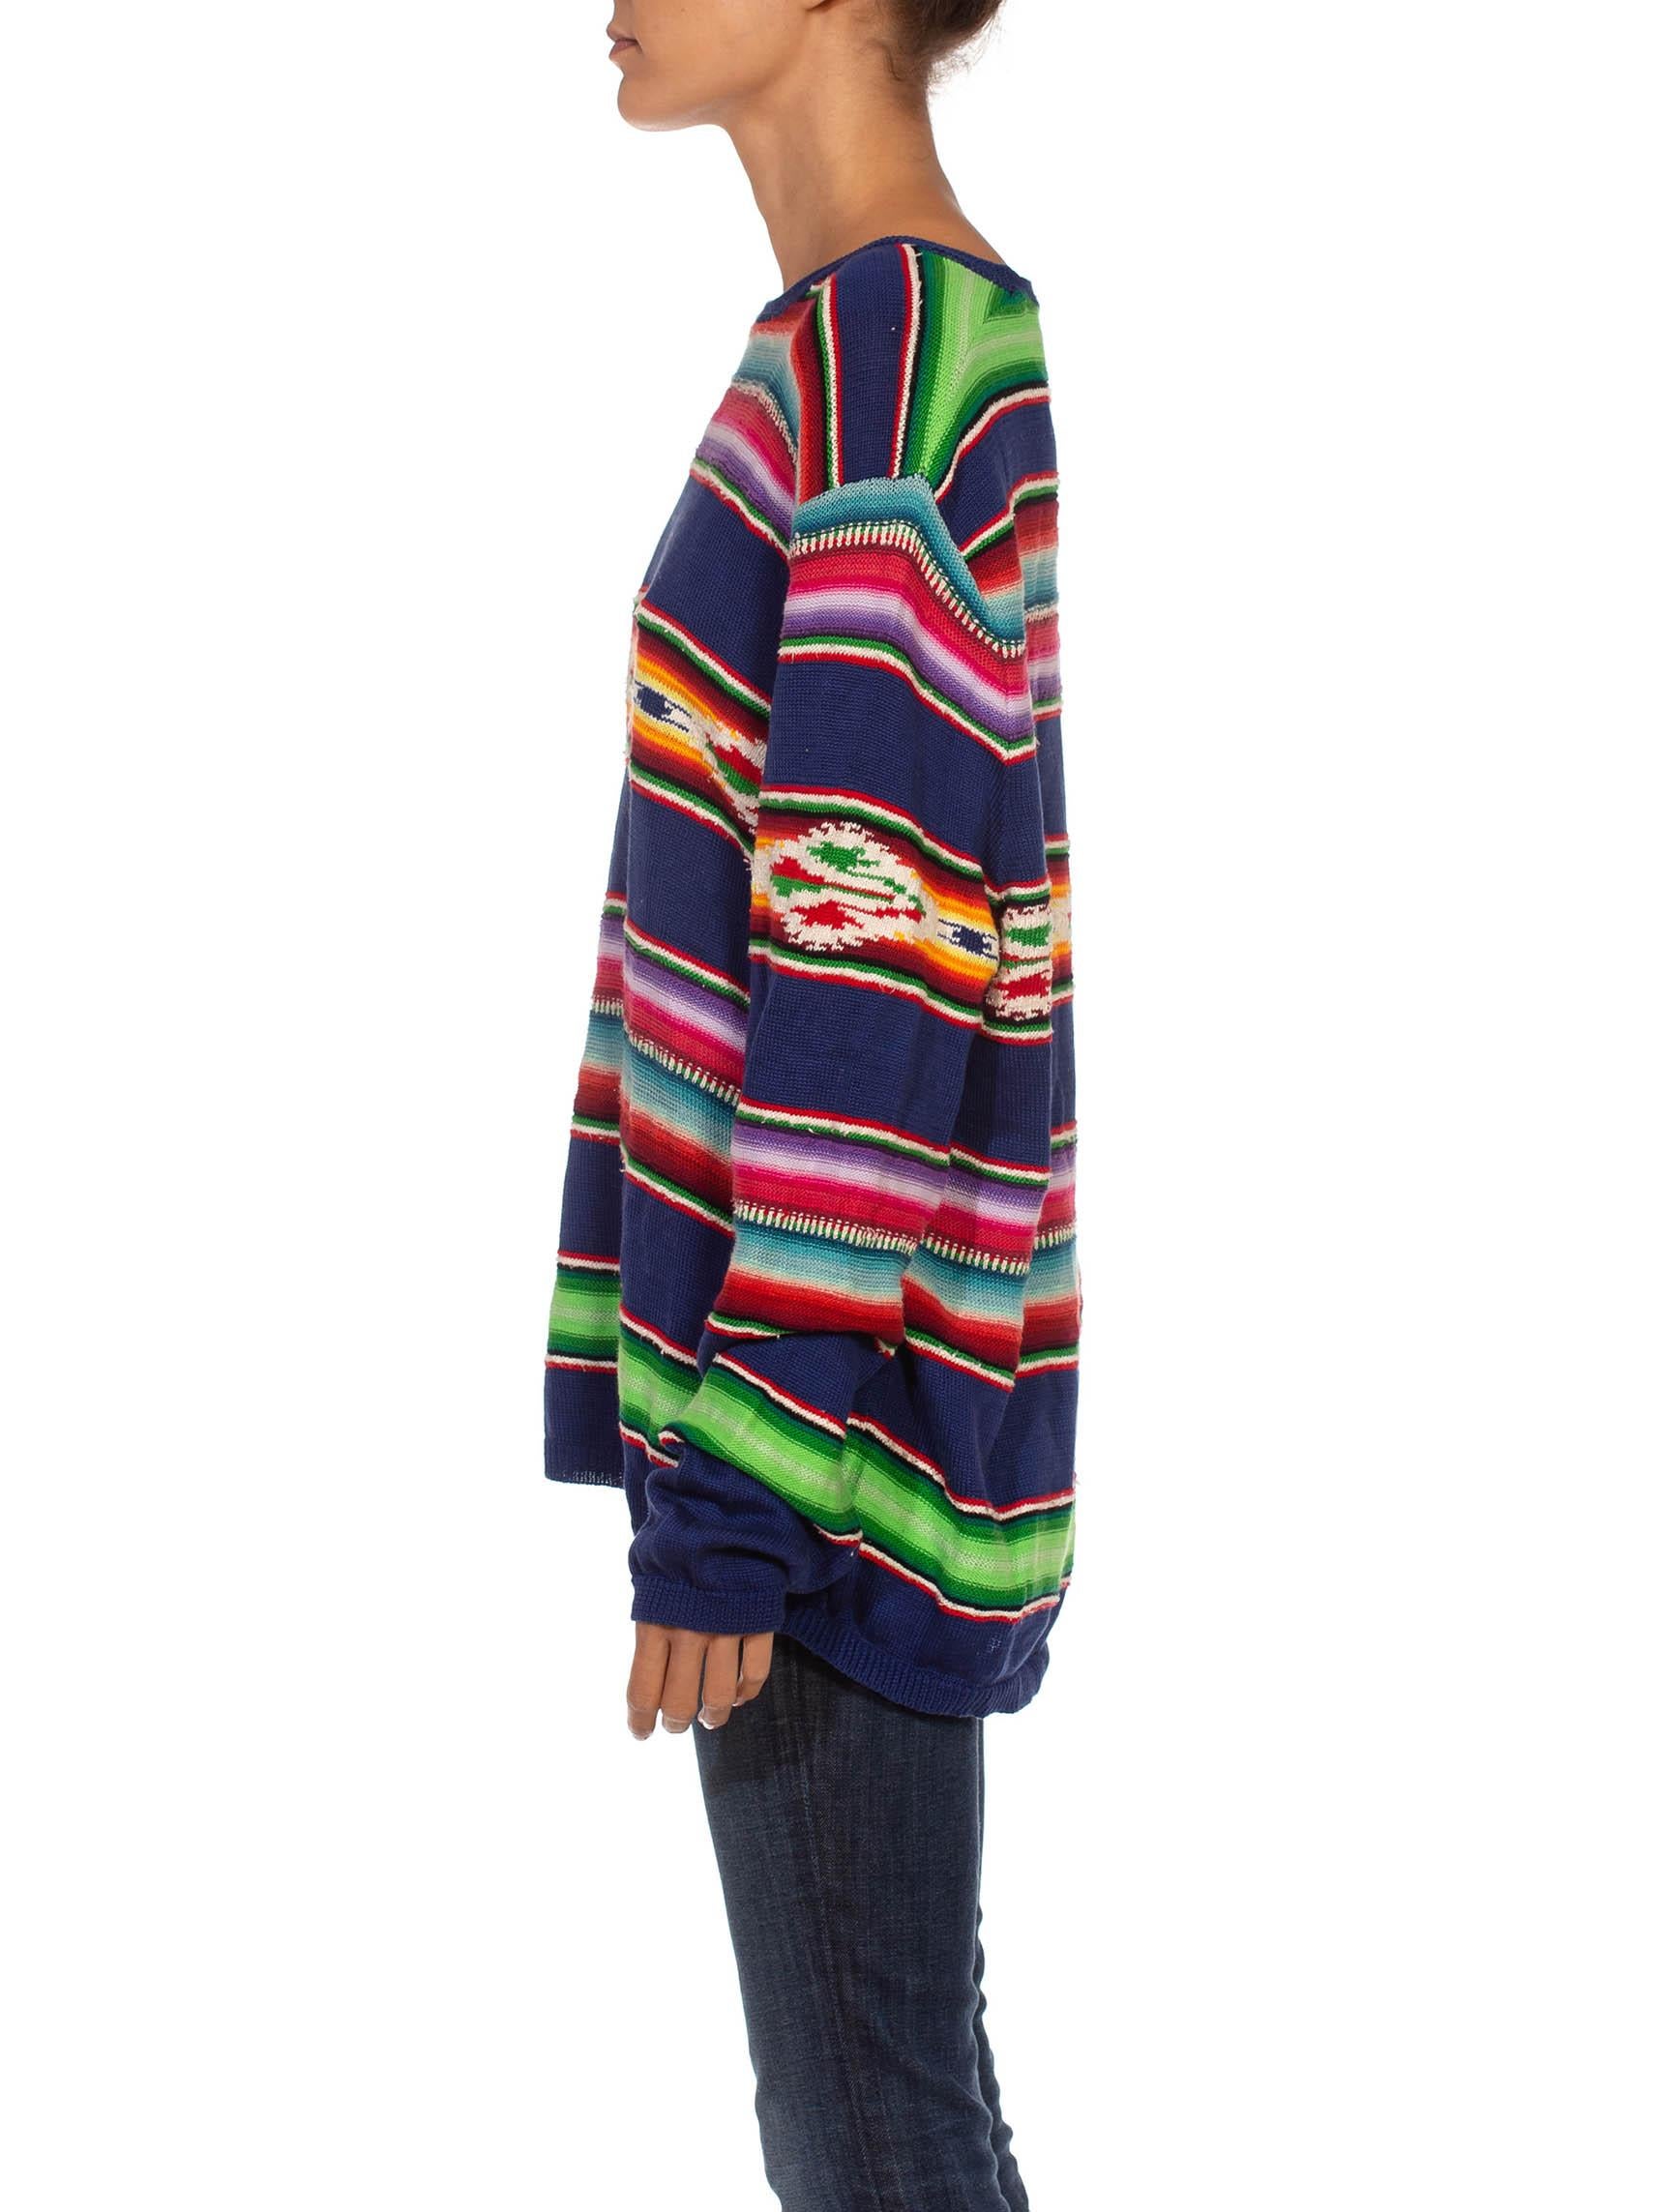 Polo by Ralph Lauren 1990S RALPH LAUREN Multicolor Striped Silk/Cotton Blend Hand Knit Native American Inspired Sweater 